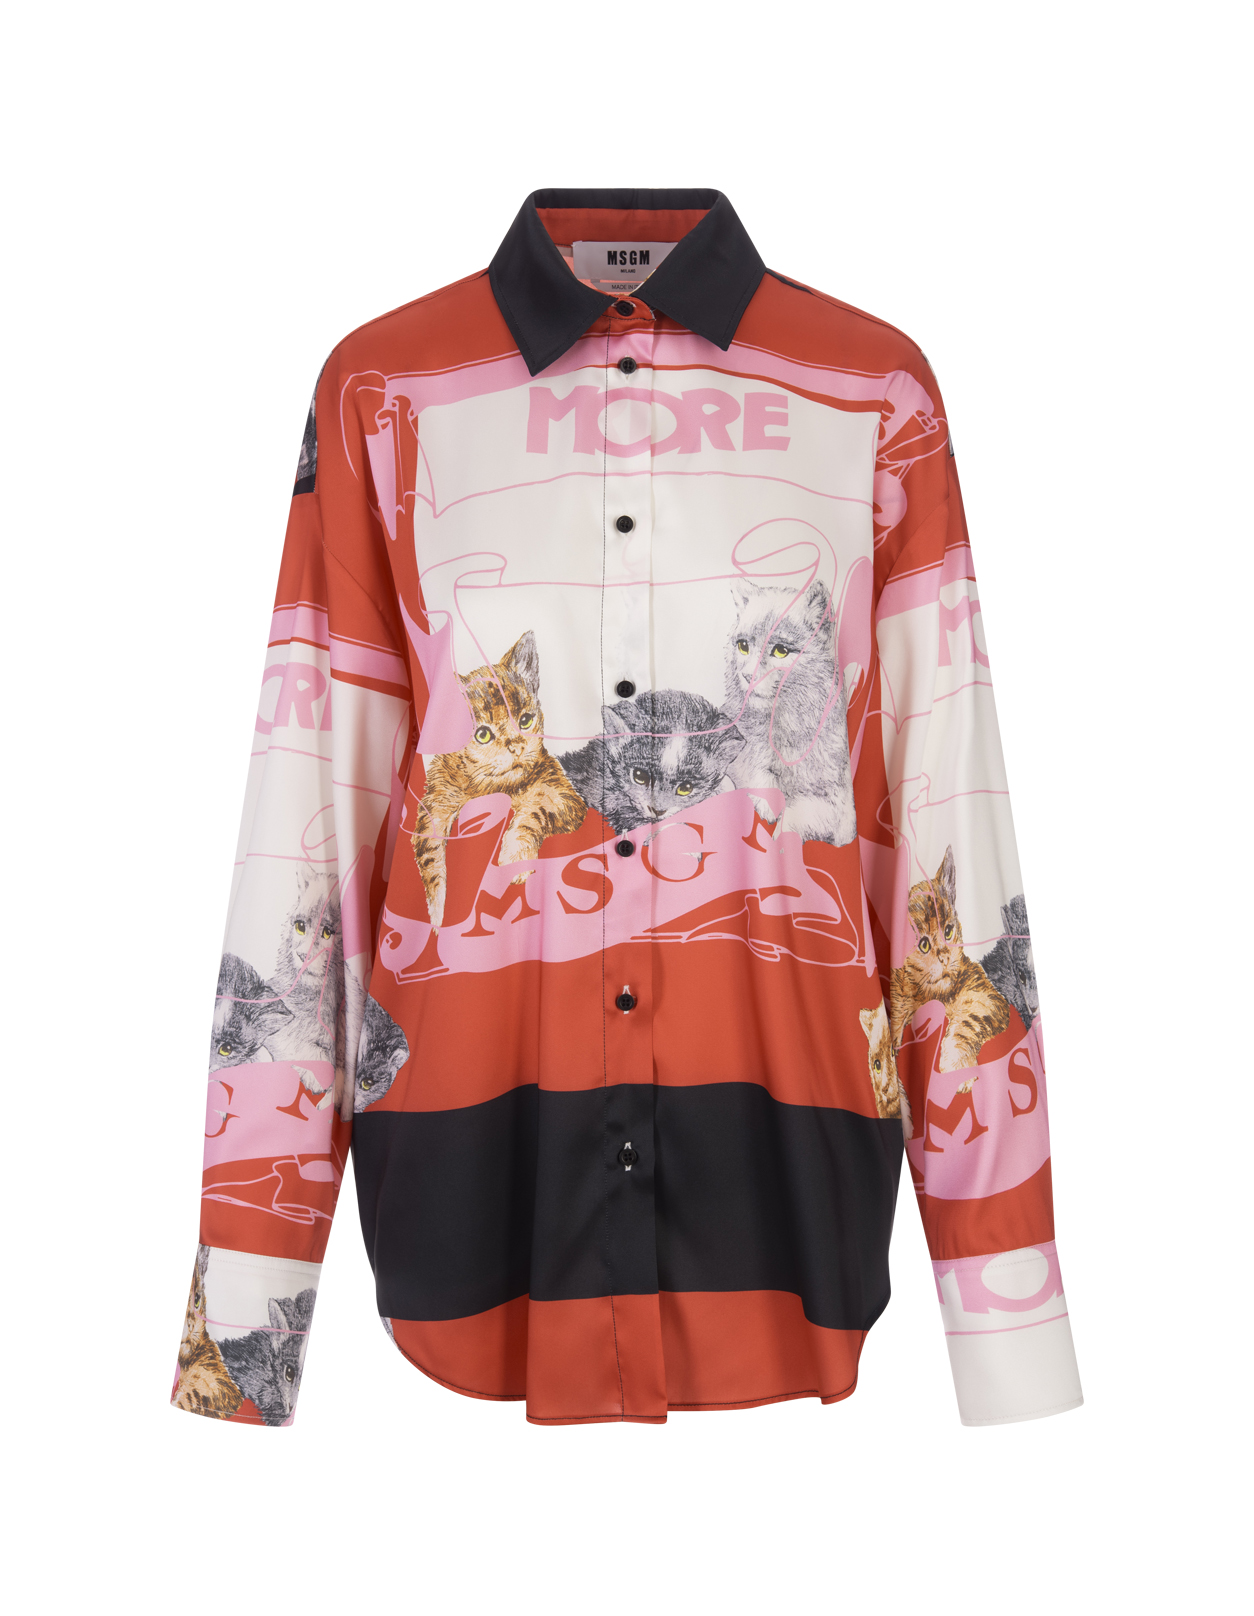 Red Shirt of the "Lorenza Longhi x MSGM" Collaboration   MSGM